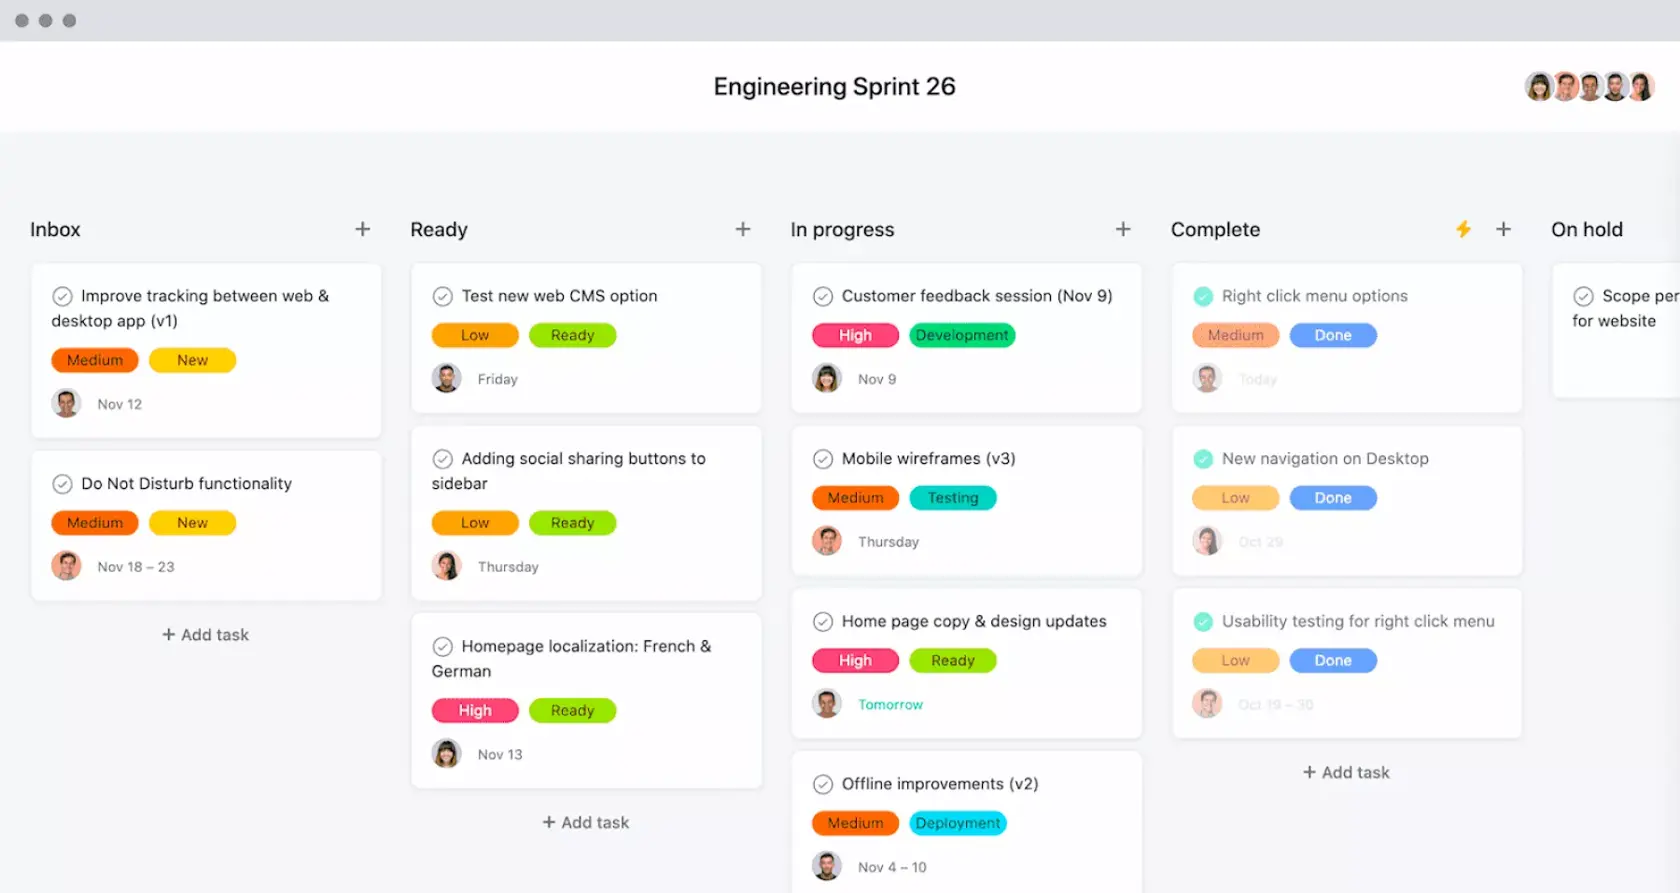 [old product ui] engineering sprint 26 (boards)